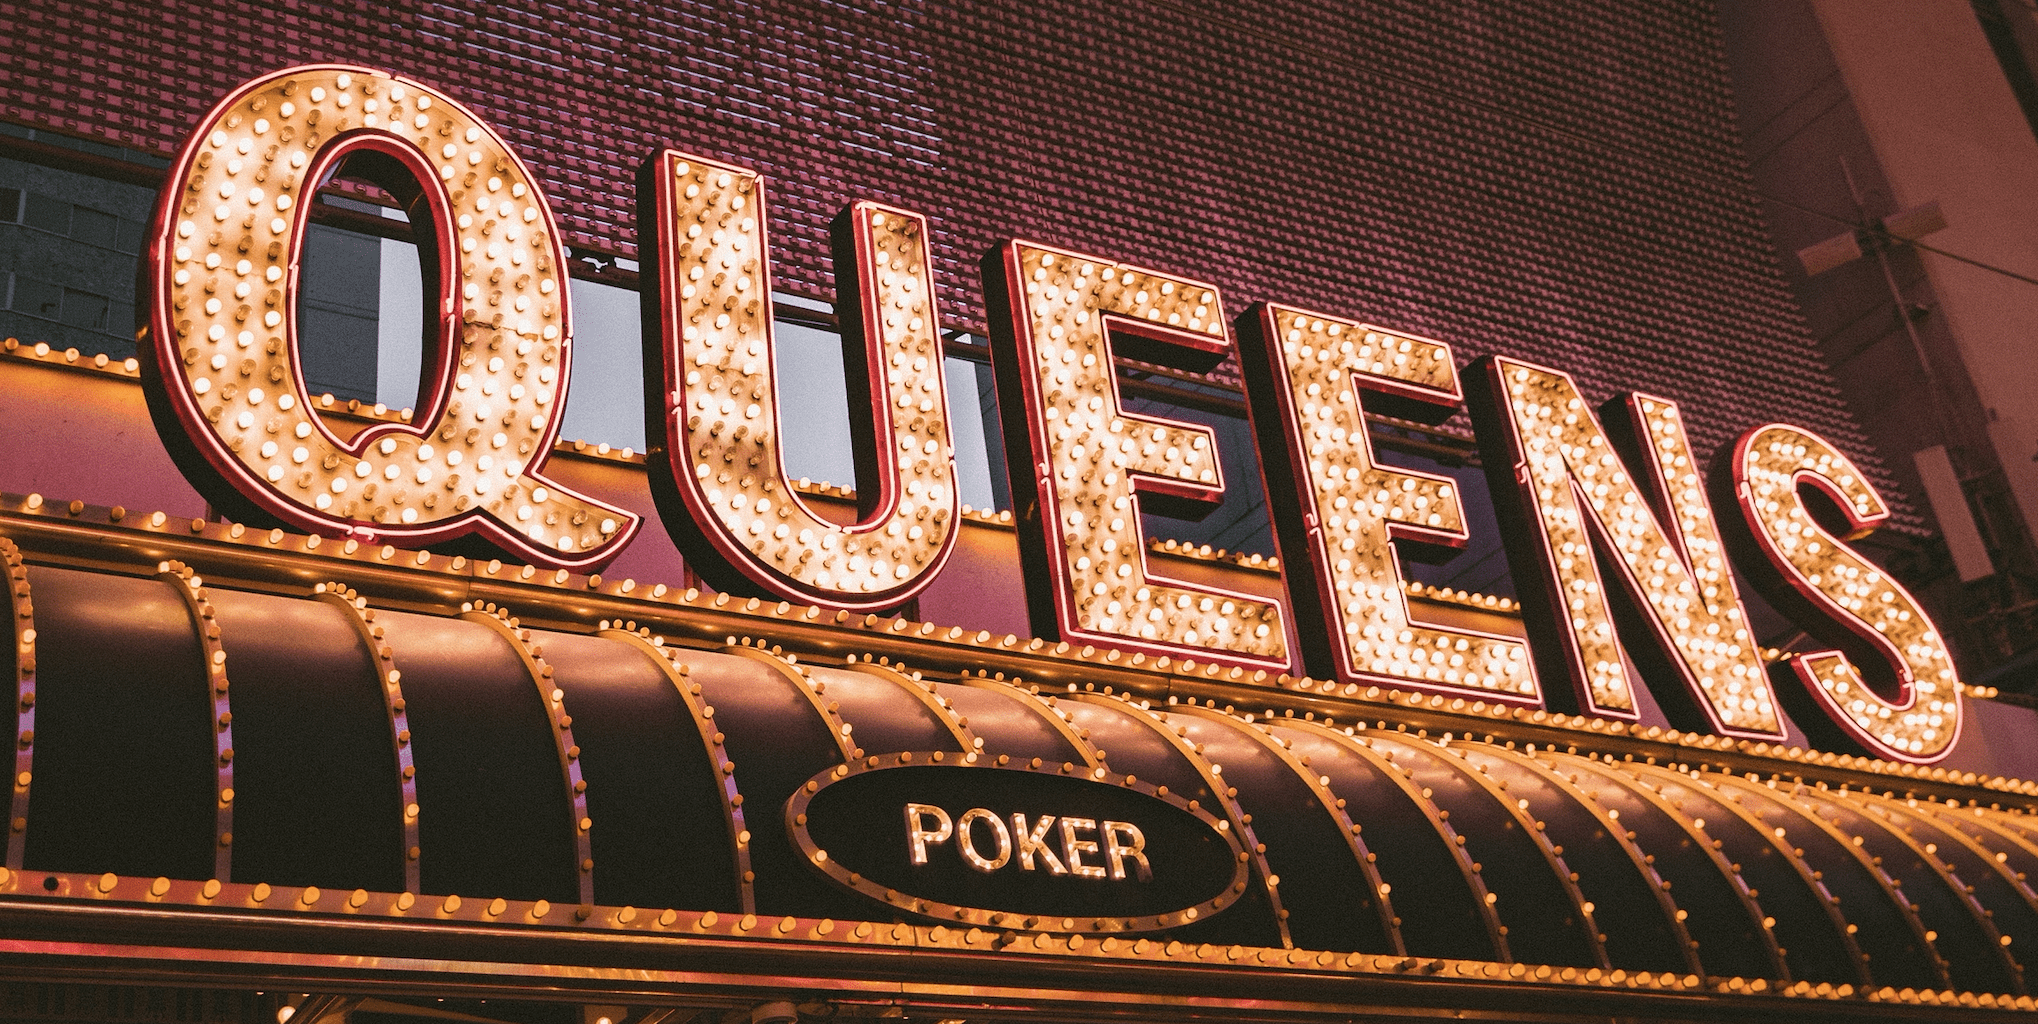 A sign for the Queen's Poker room is lit up at night. - Neon orange